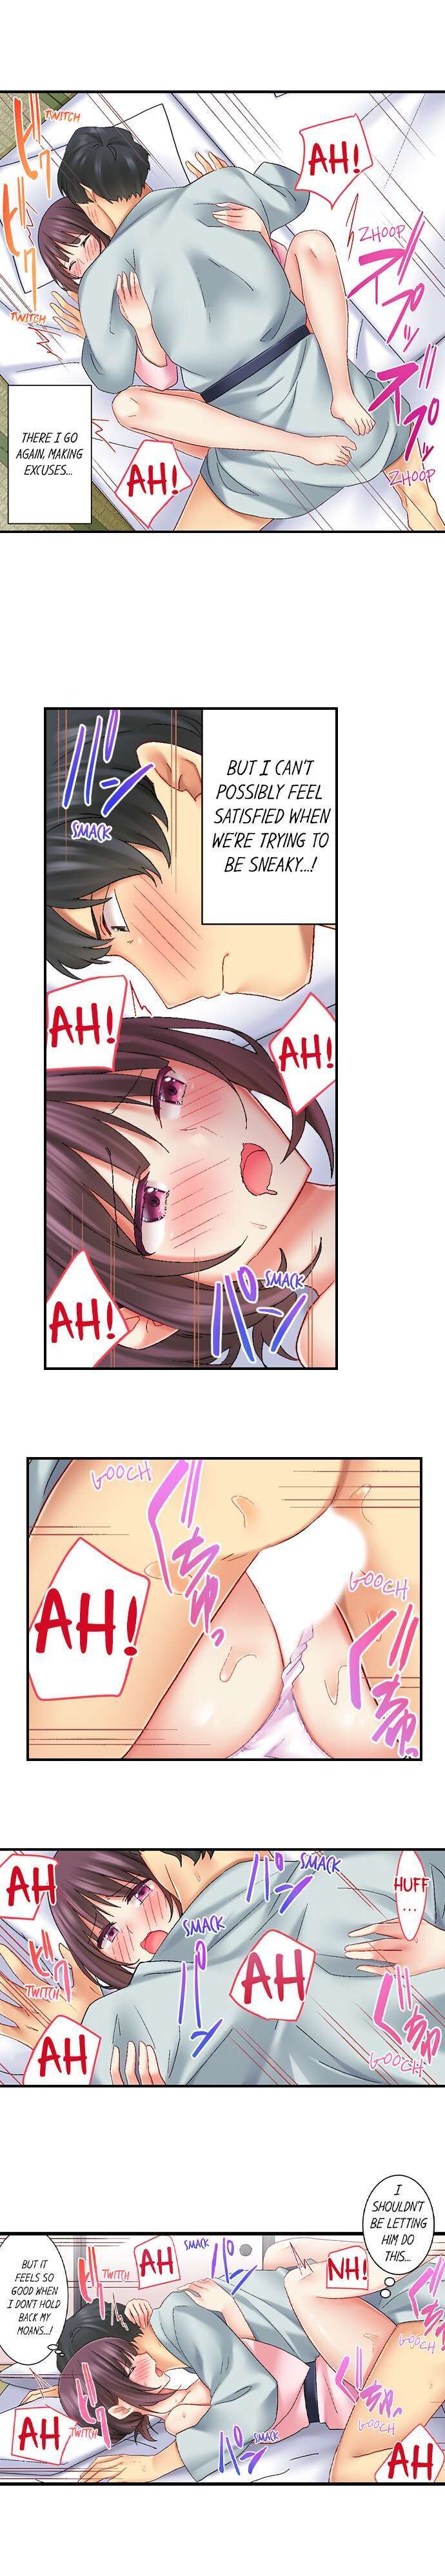 Our Kinky Newlywed Life - Chapter 12 Page 6